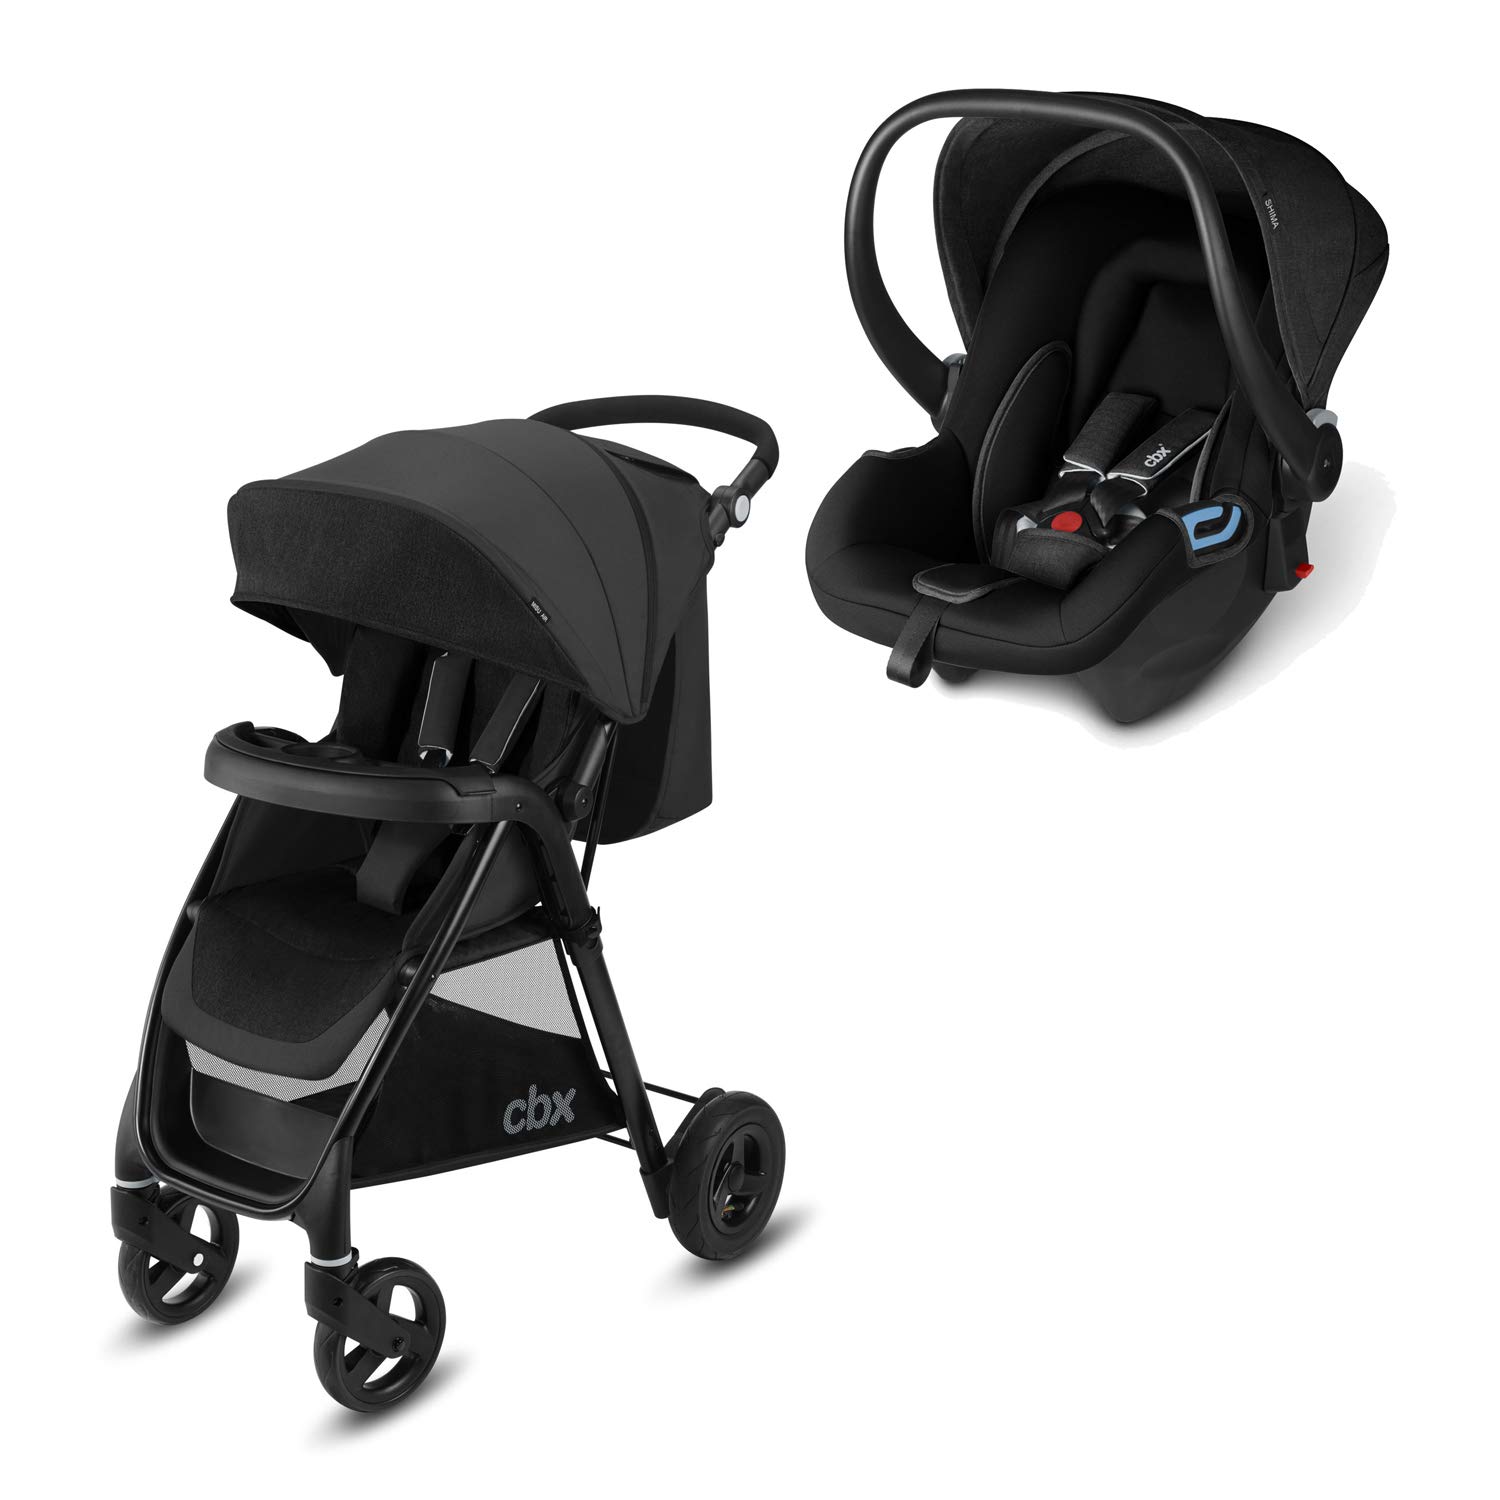 CBX Misu Air TS, Stroller or Collection 2018, Smoky Charcoal grey